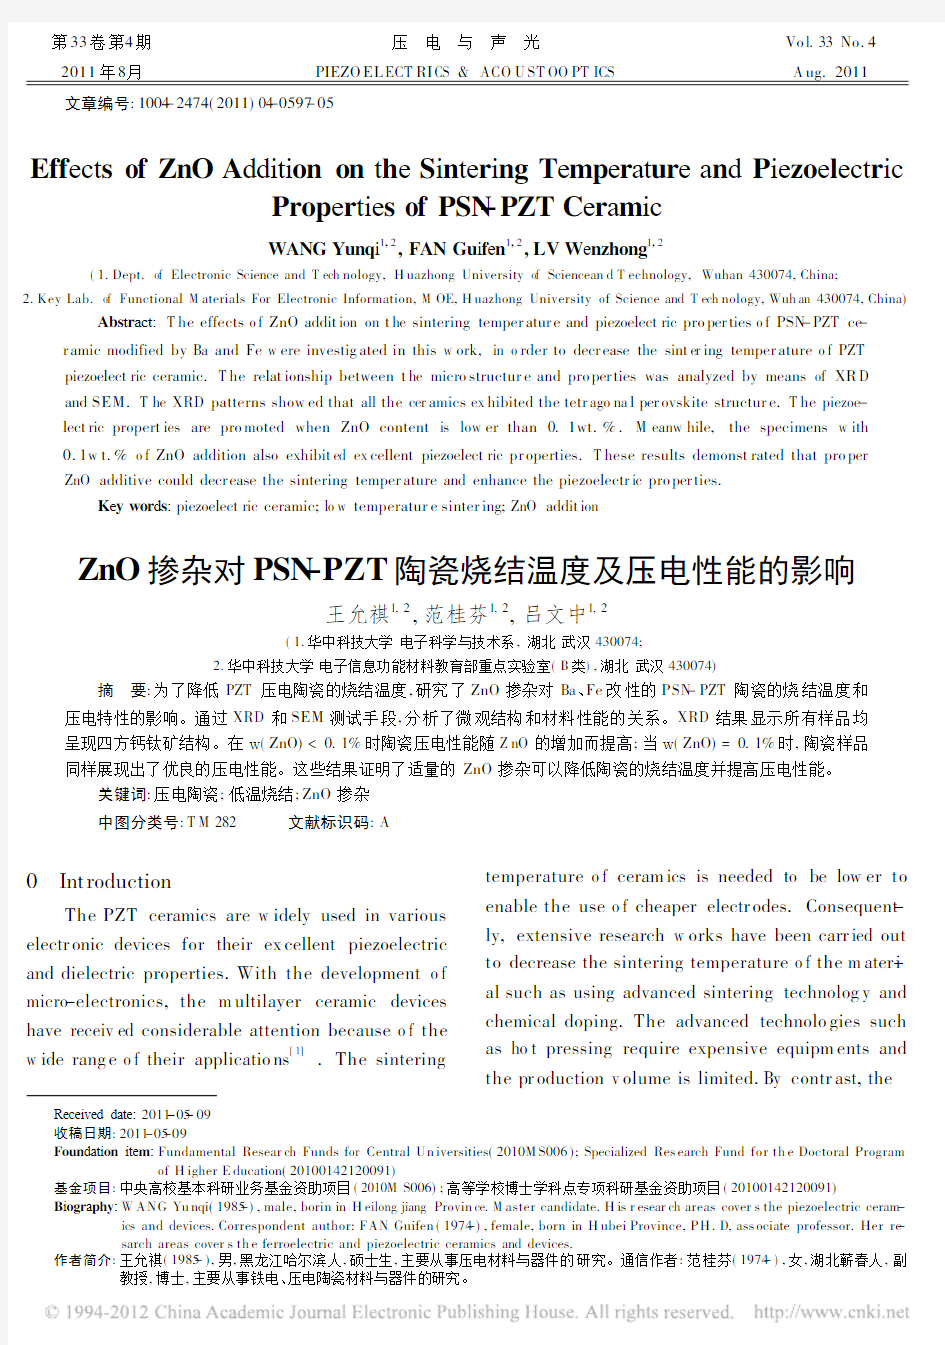 Effects of ZnO Addition on the Sintering Temperature and Piezoelectric Properties of PSN-PZT Ceramic